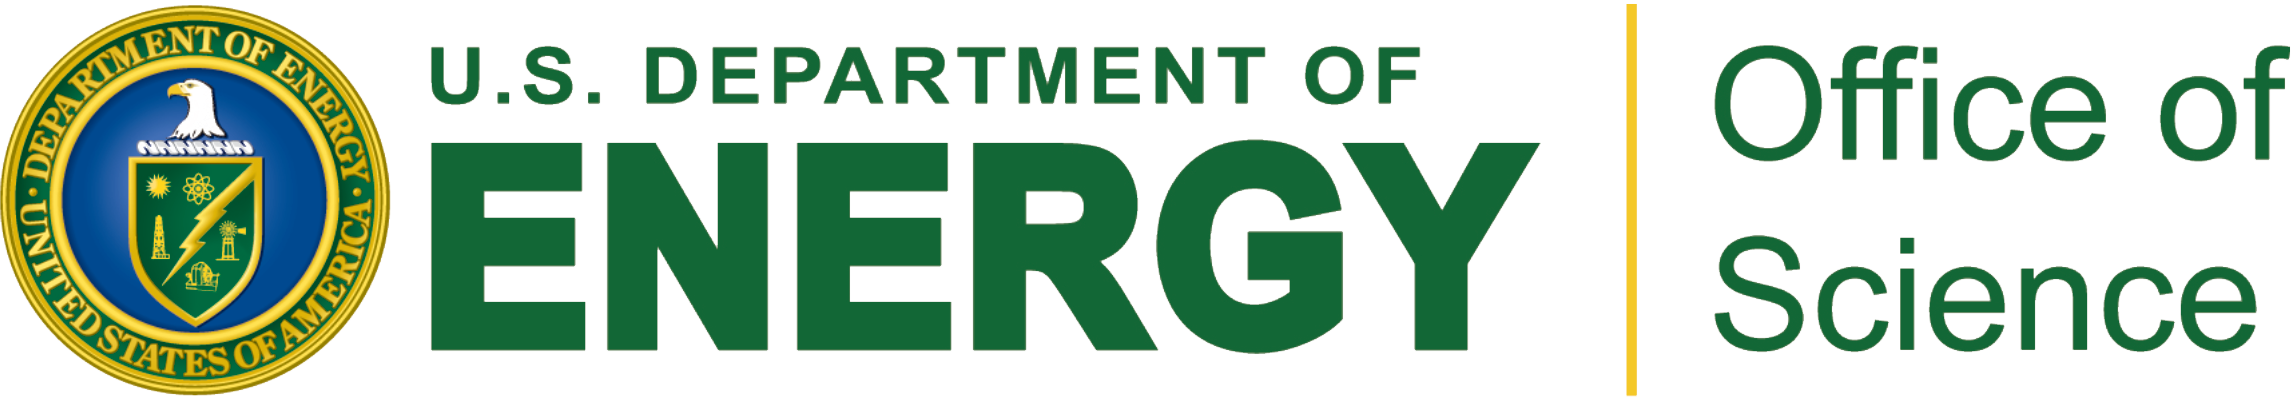 Logo of U.S. Department of Energy Office of Science